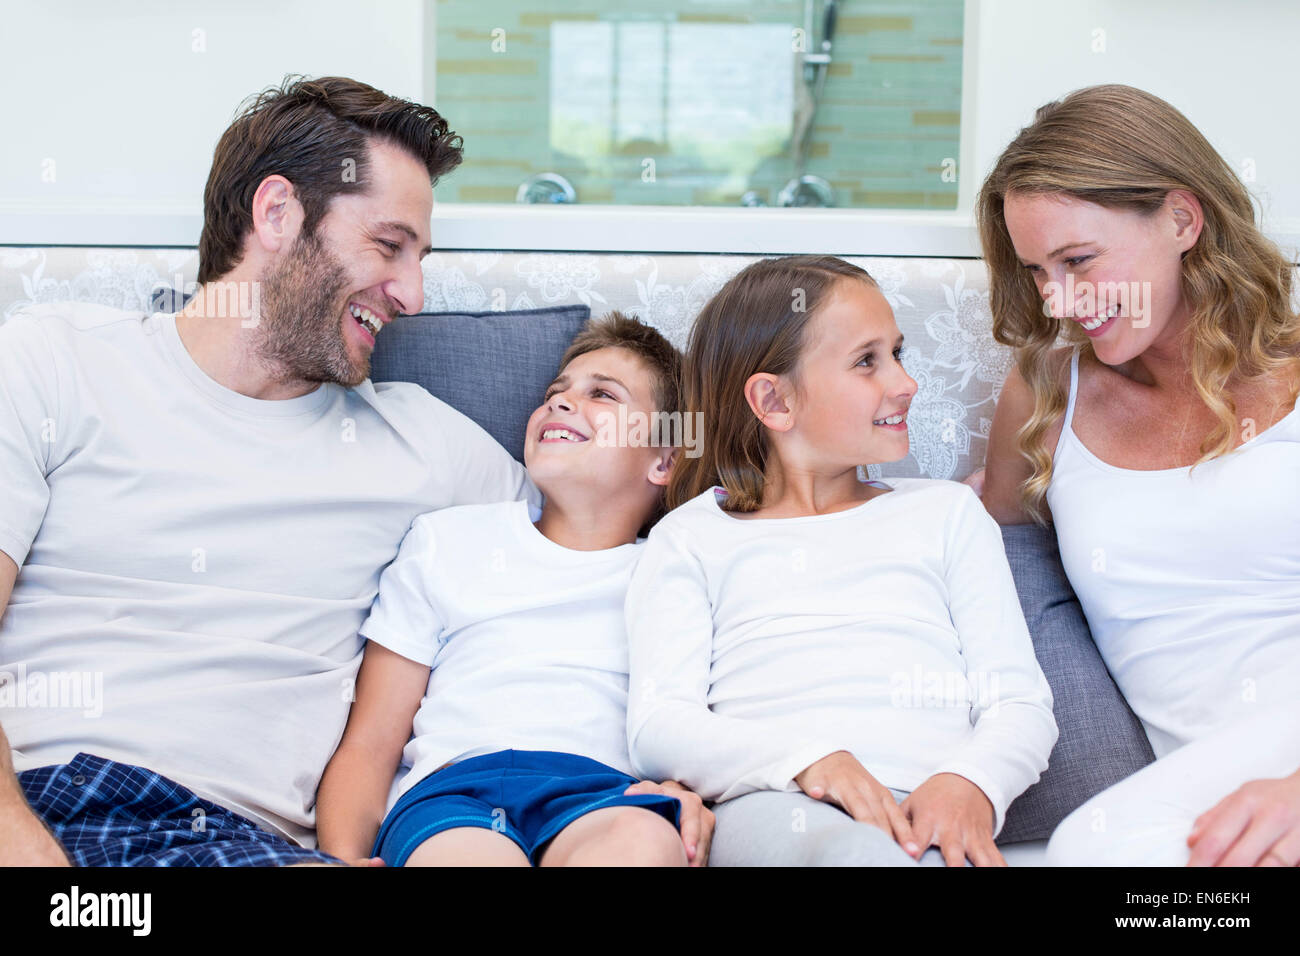 Happy Family smiling at each other Banque D'Images